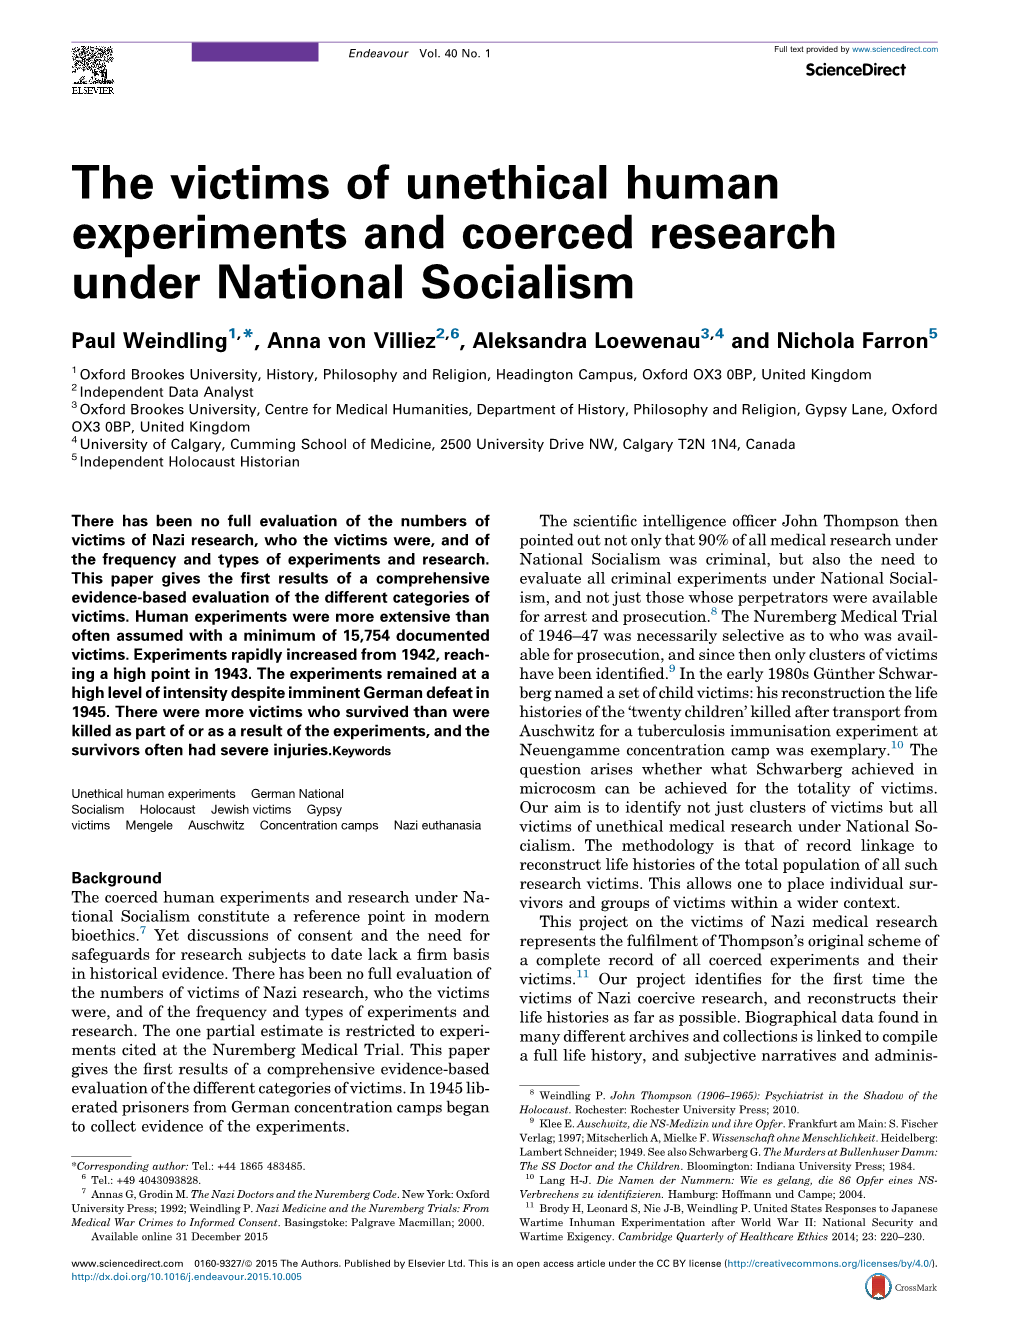 The Victims of Unethical Human Experiments and Coerced Research Under National Socialism